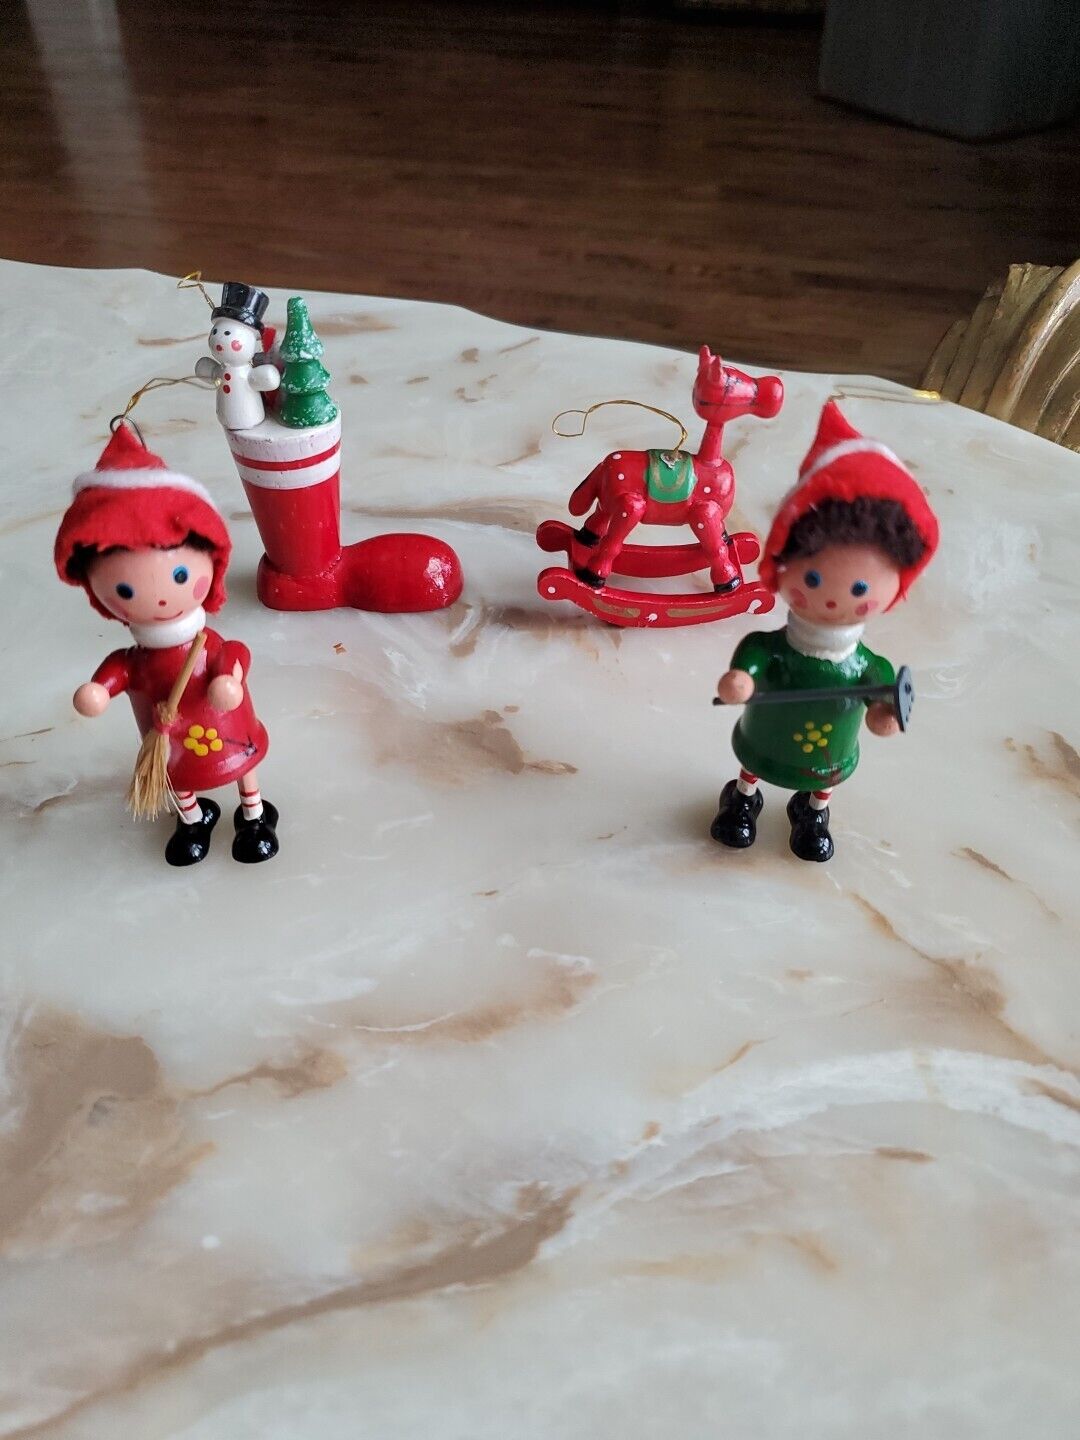 Vintage Wooden Christmas Ornaments Lot Of 4 Rocking Horse, Stocking, Figures